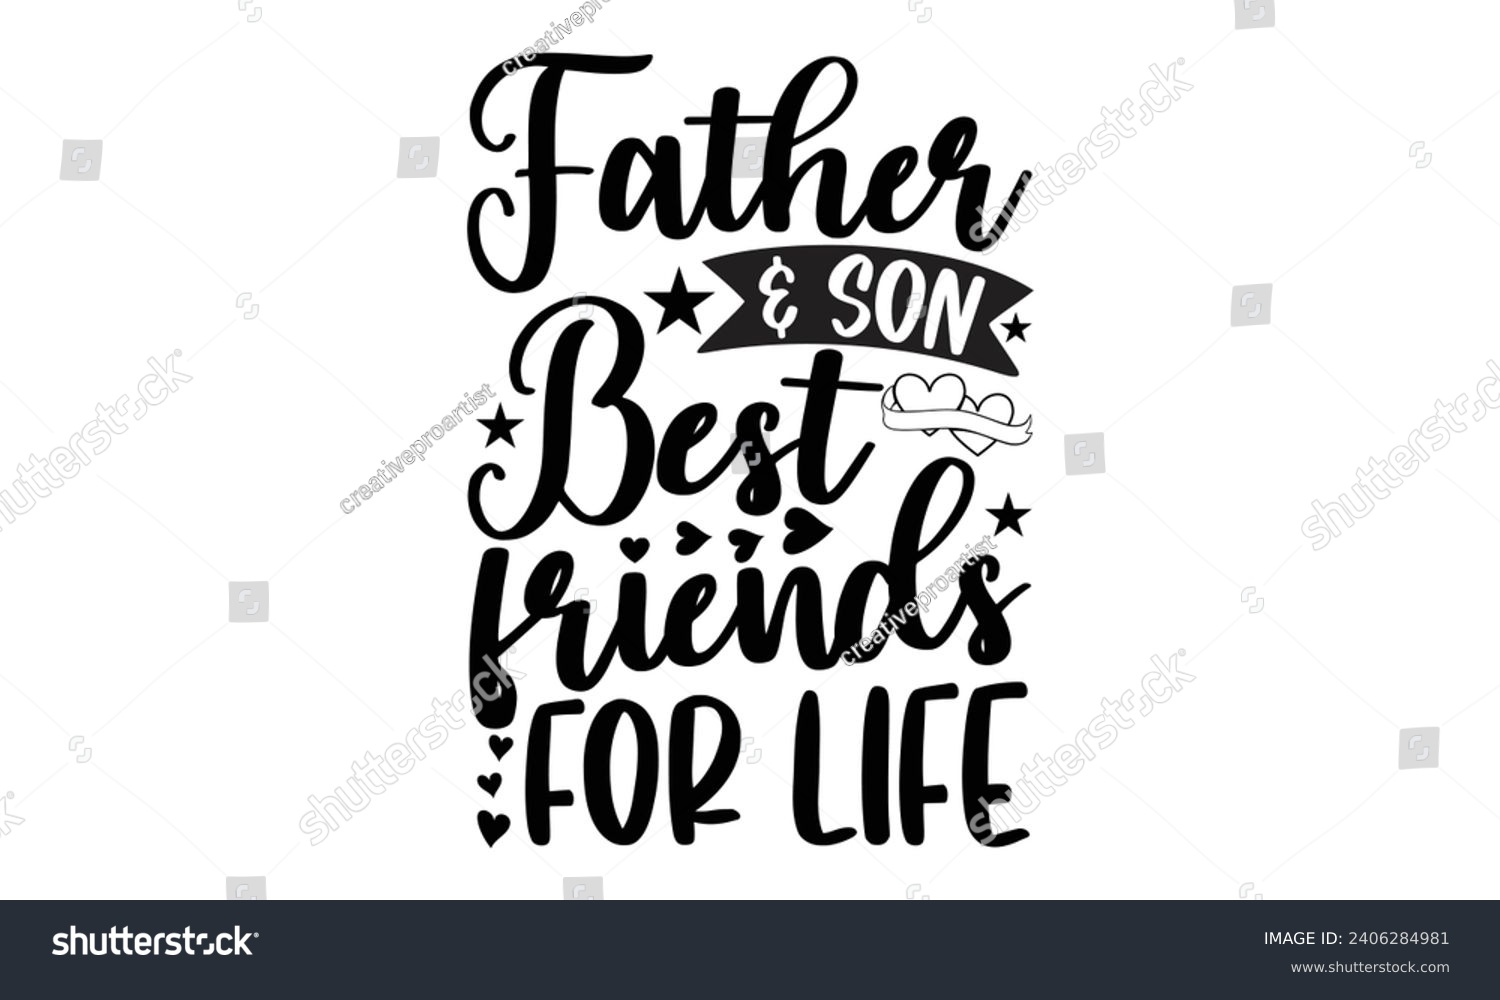 SVG of Father  Son Best Friends For Life- Best friends t- shirt design, Hand drawn lettering phrase, Illustration for prints on bags, posters, cards eps, Files for Cutting, Isolated on white background. svg